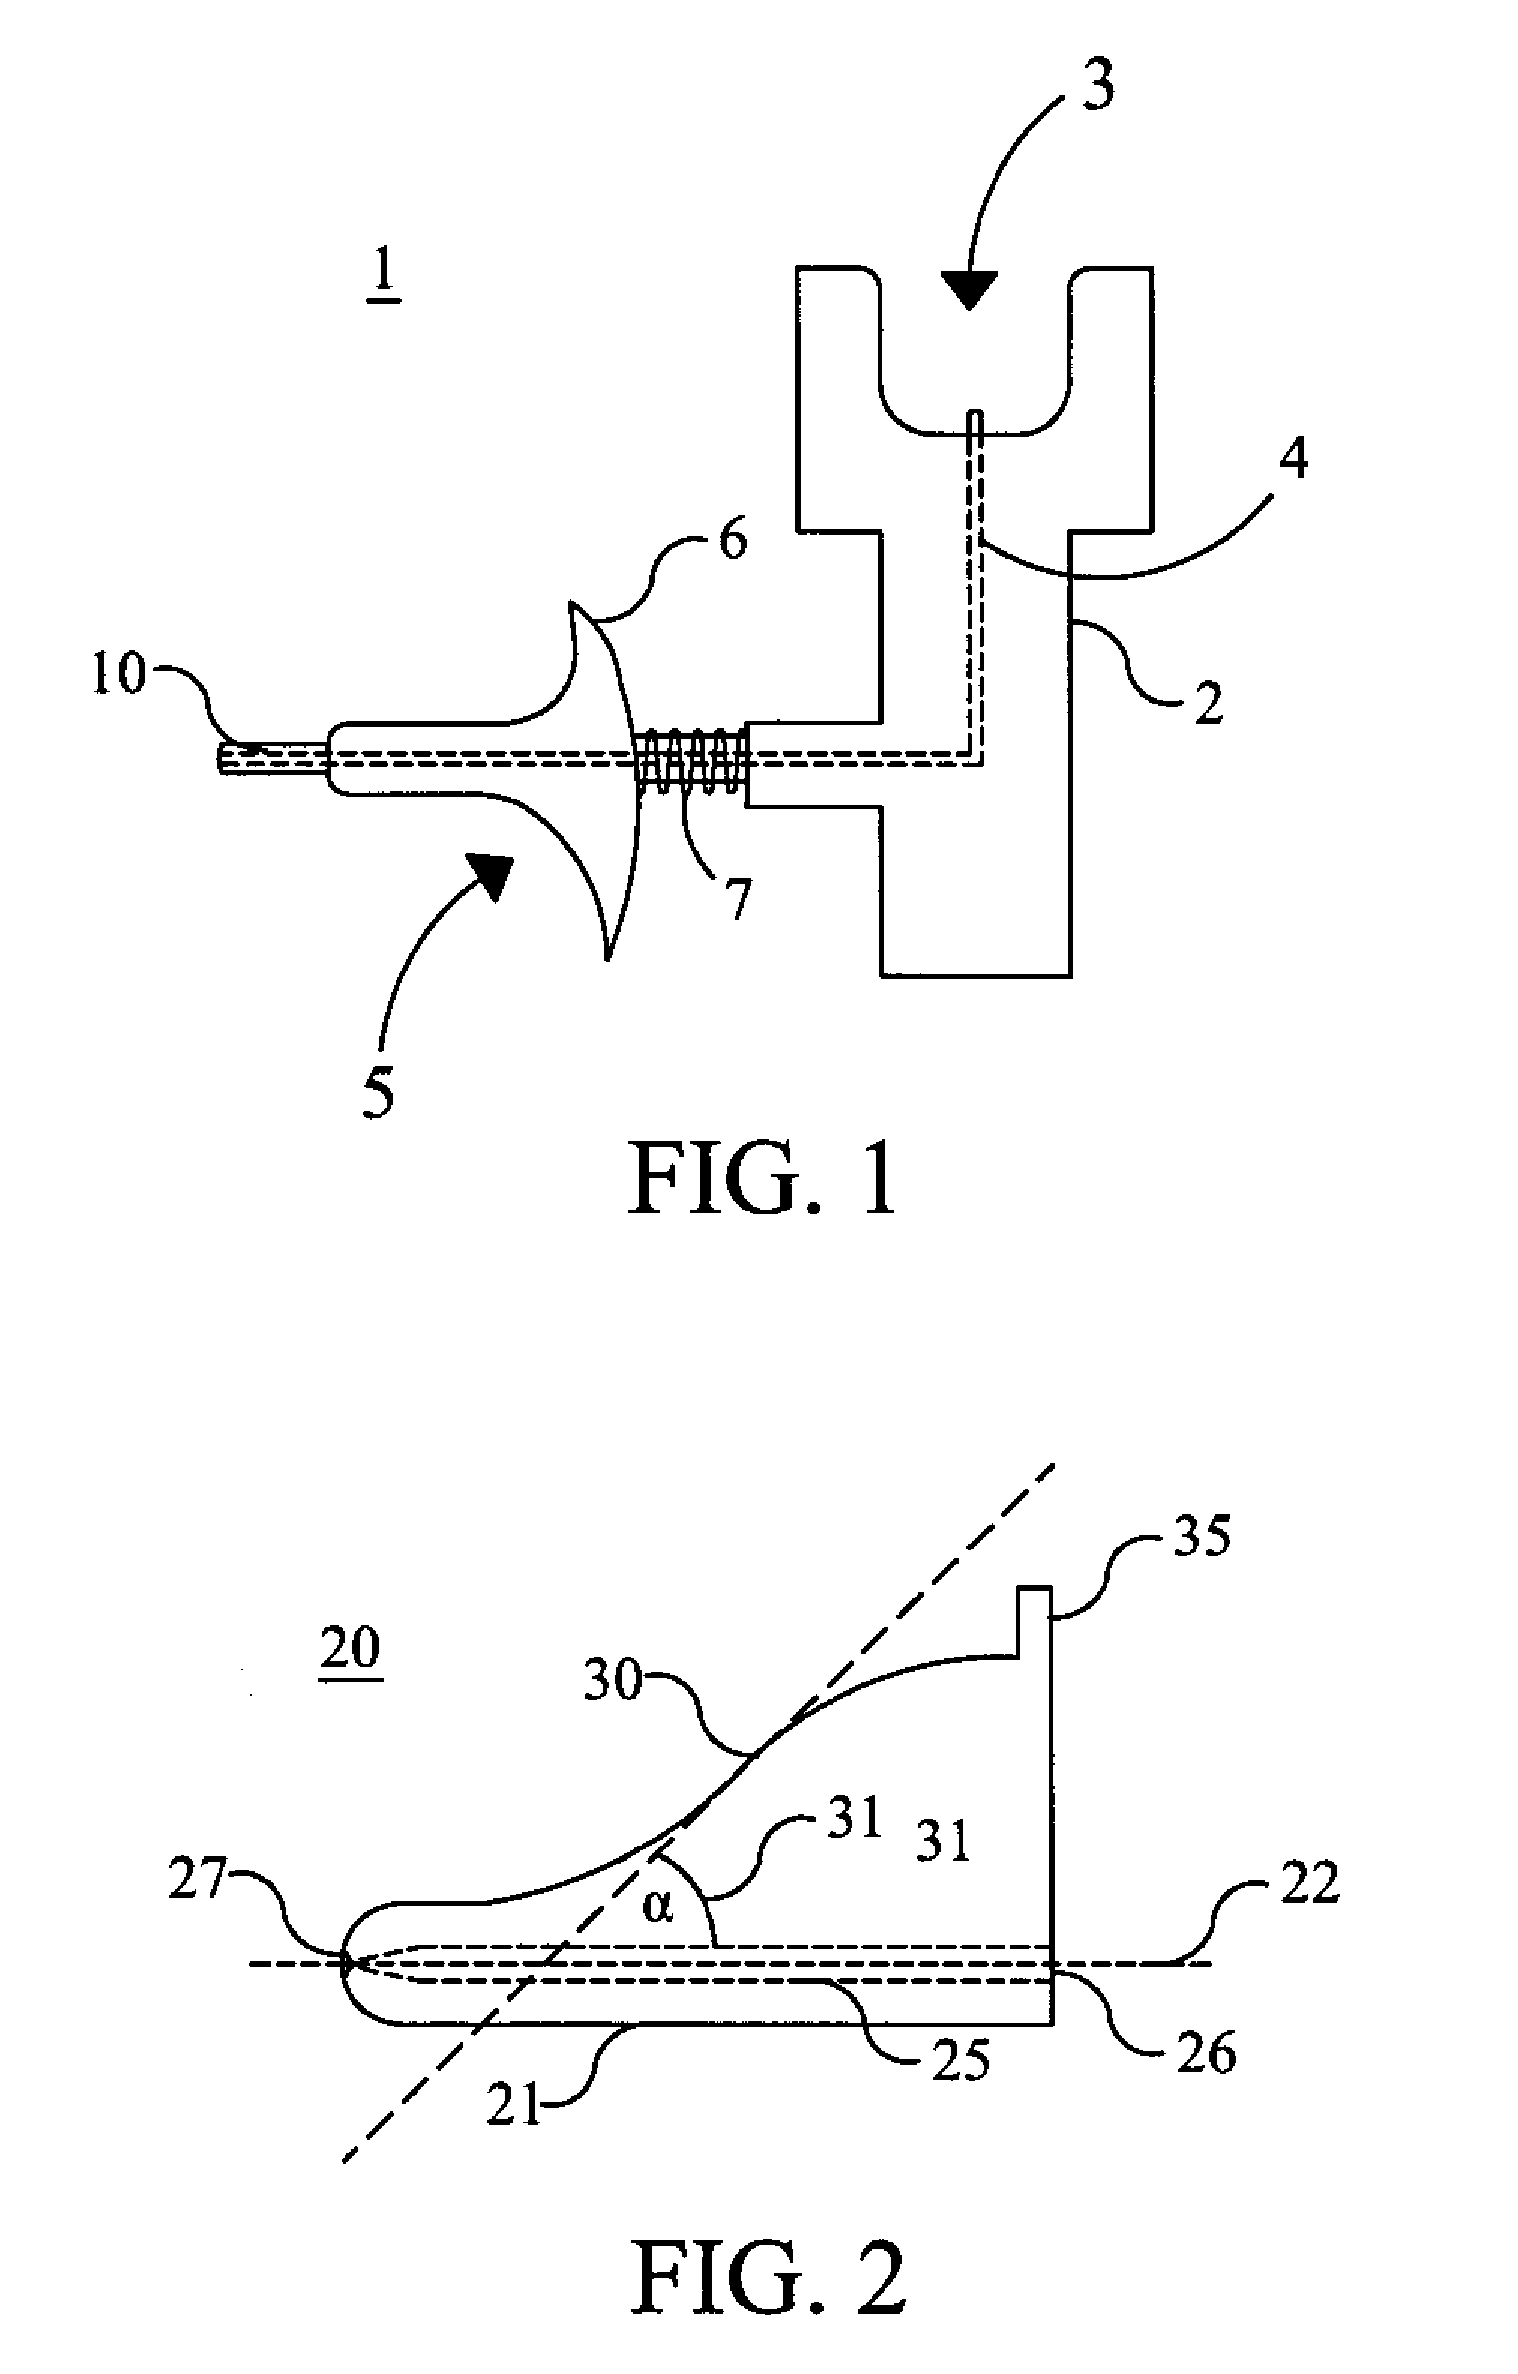 Method for intranasal administration of a pharmaceutical composition